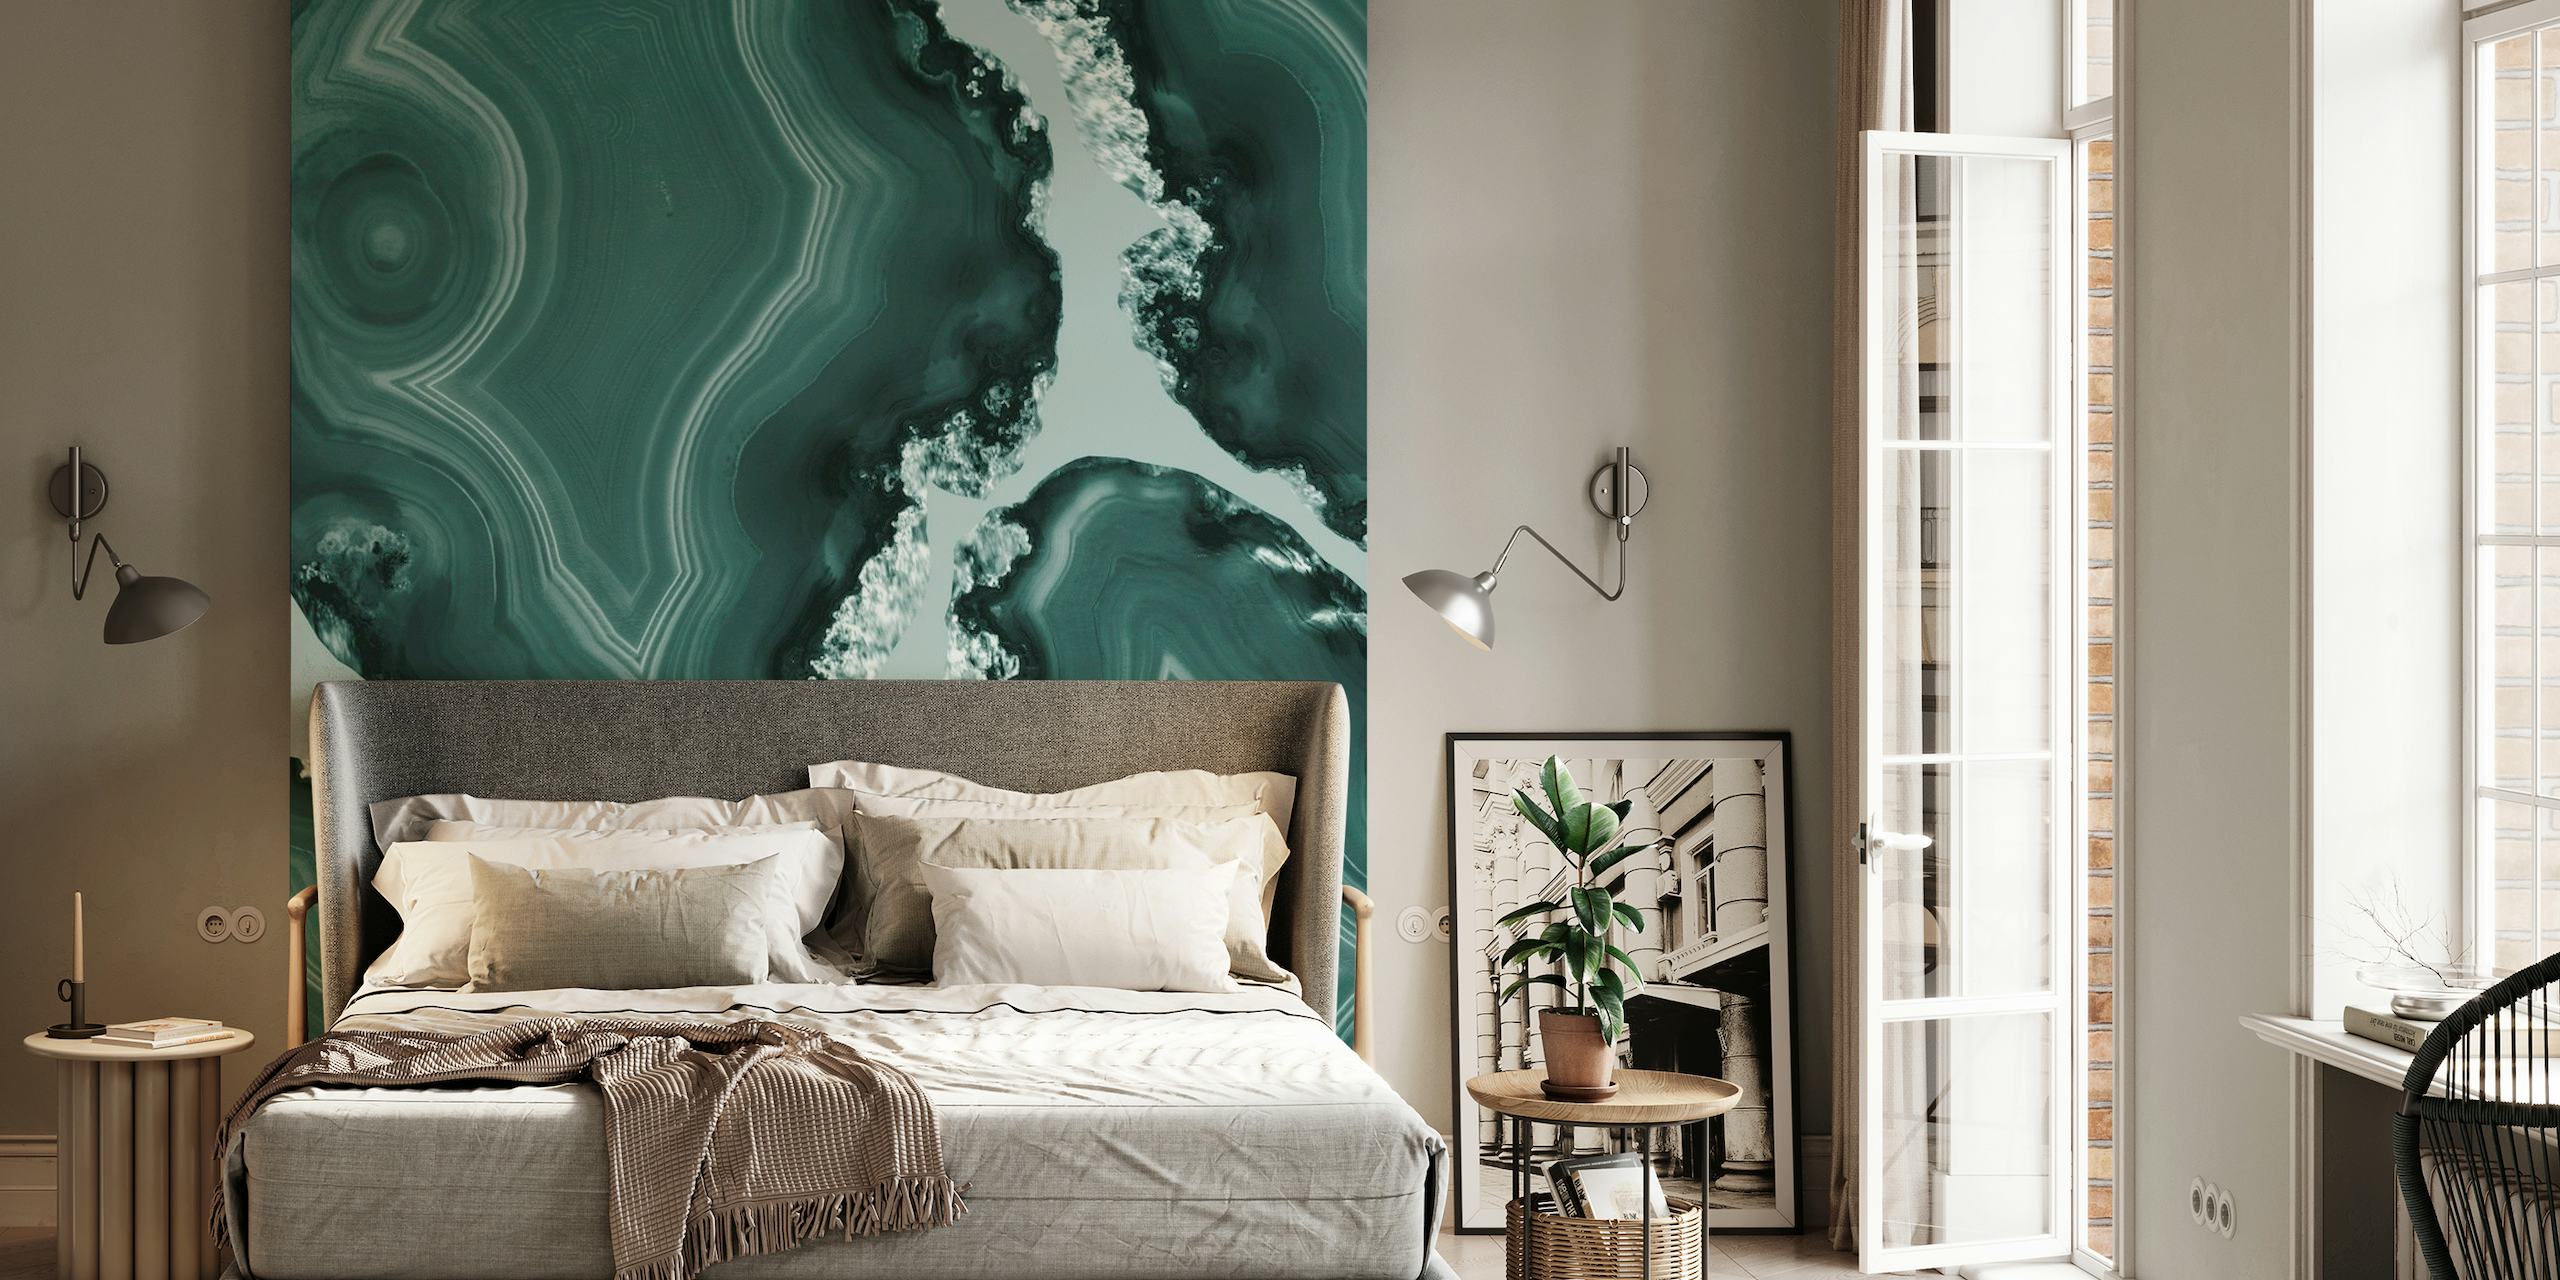 Teal Agate Pattern wall mural showcasing swirls of teal and aquamarine resembling natural stone